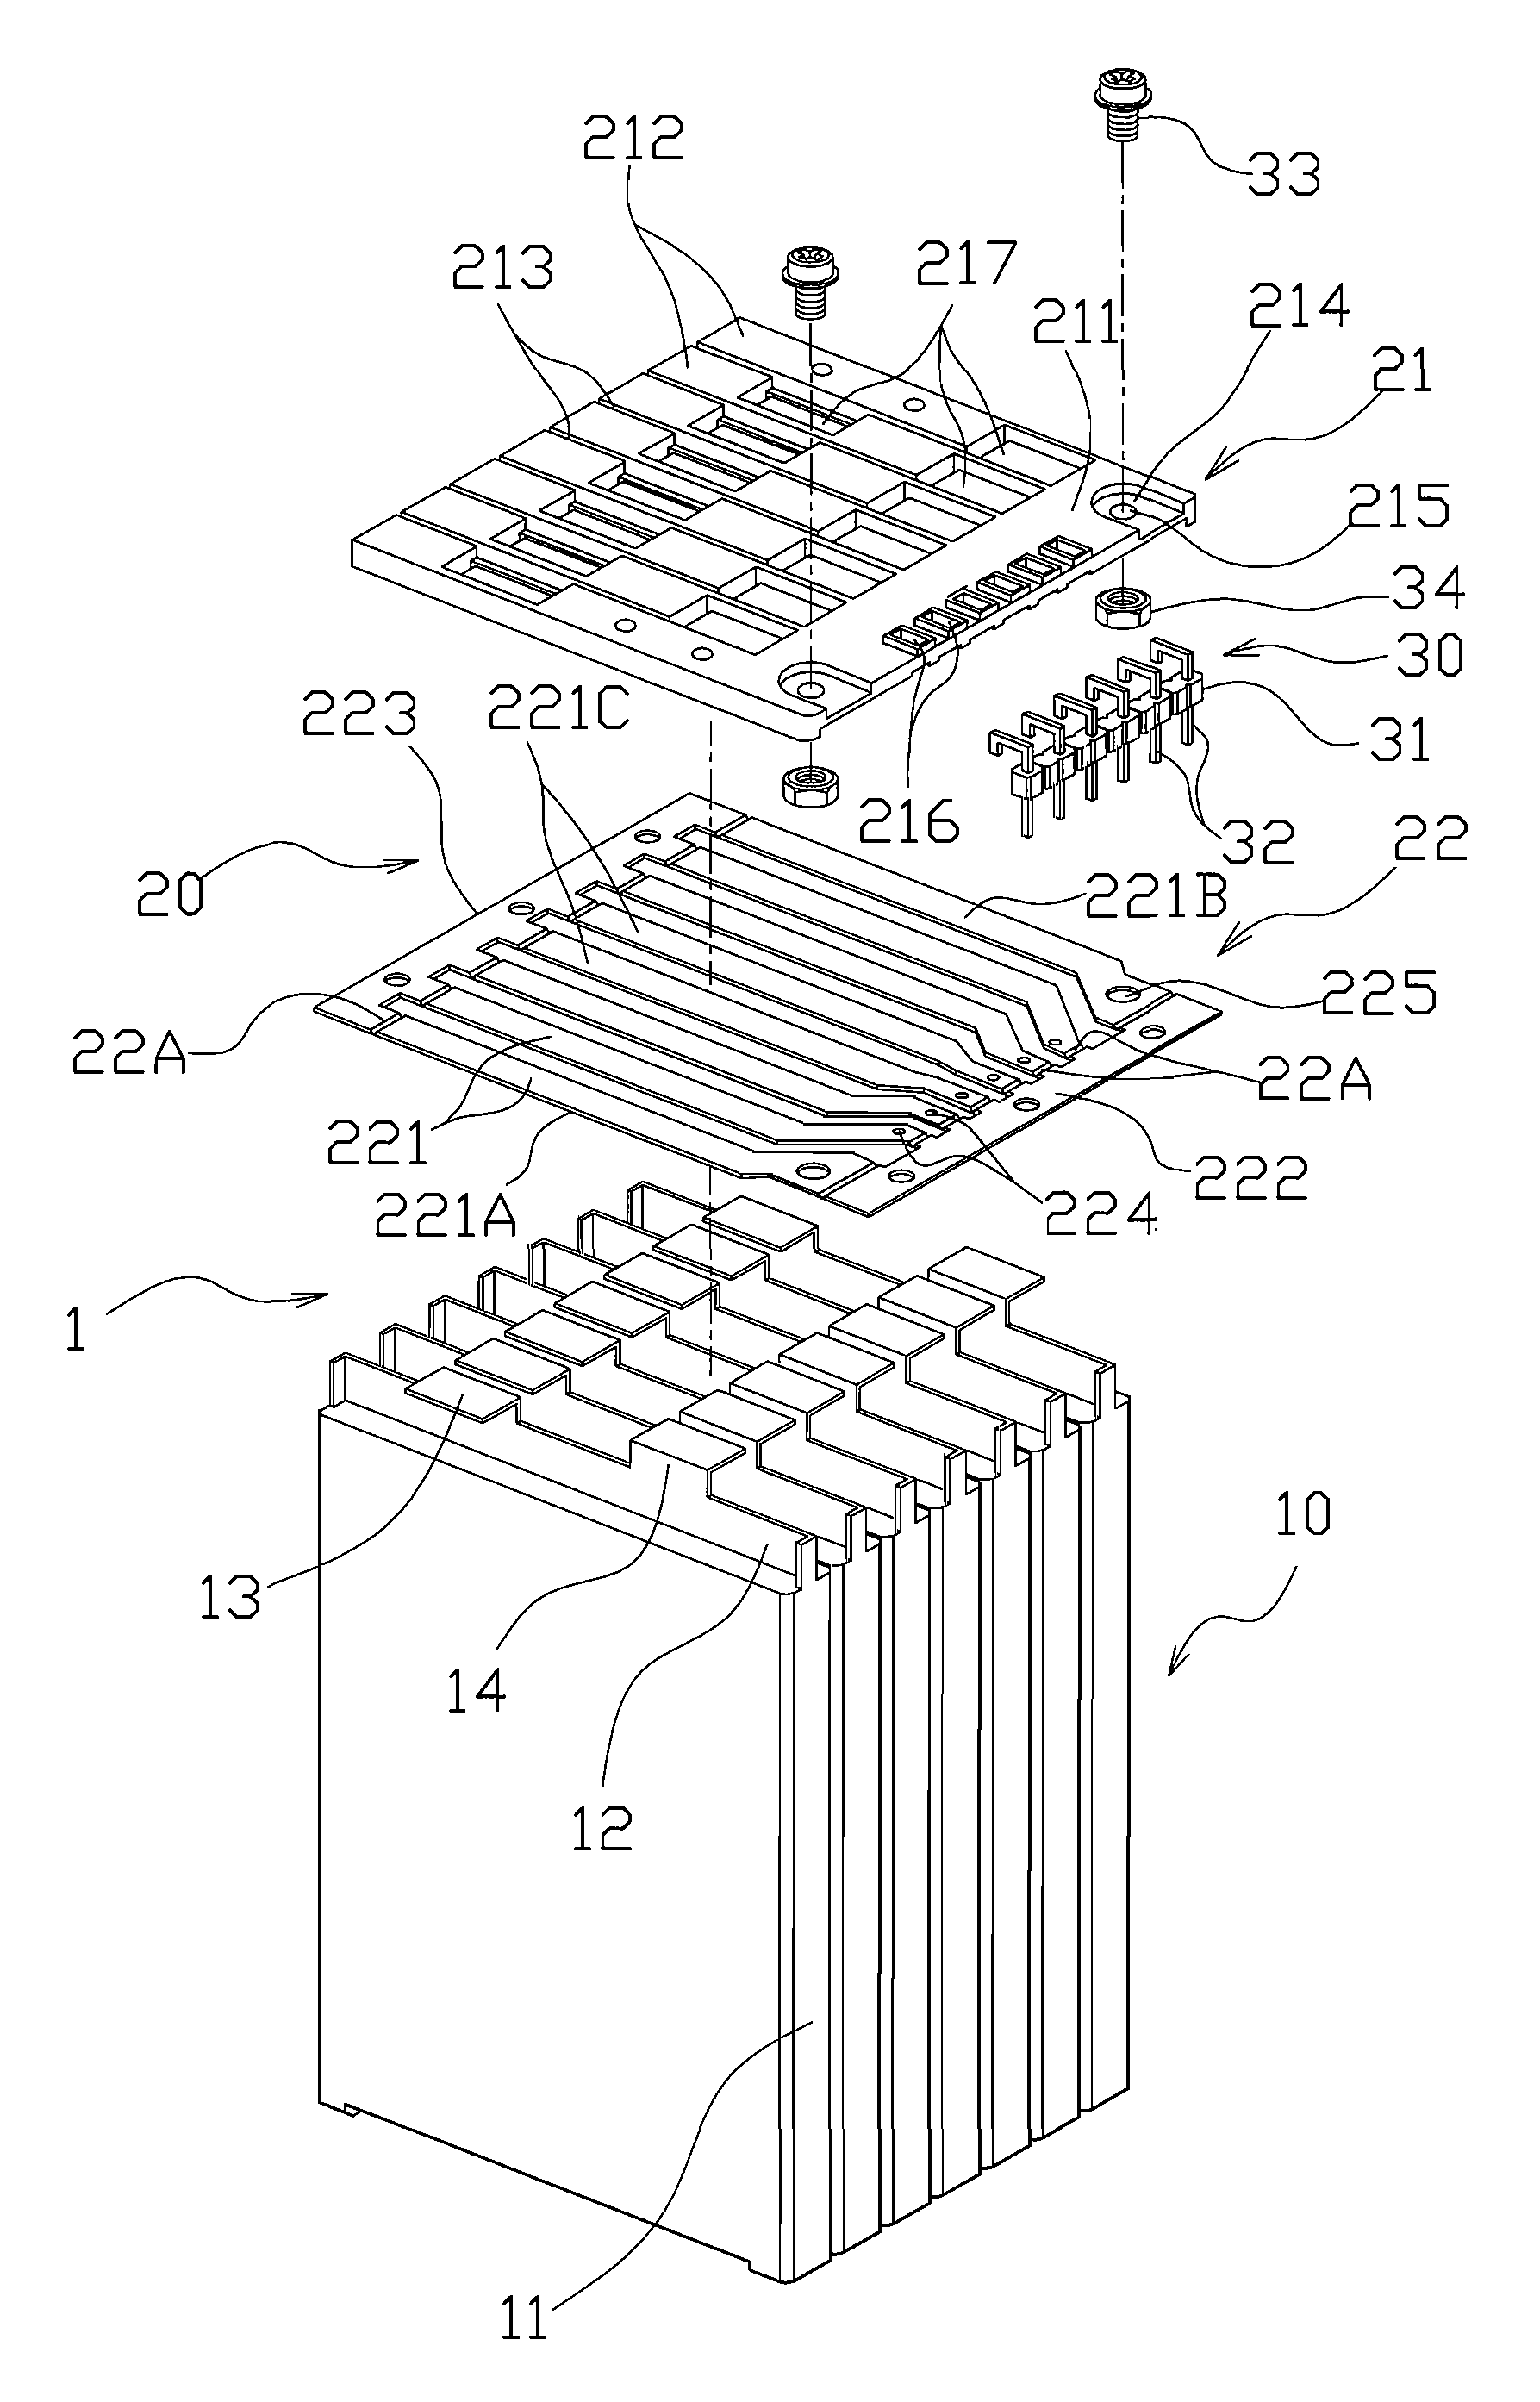 Multi-cells connection board (MCB) assembly and its fabrication method